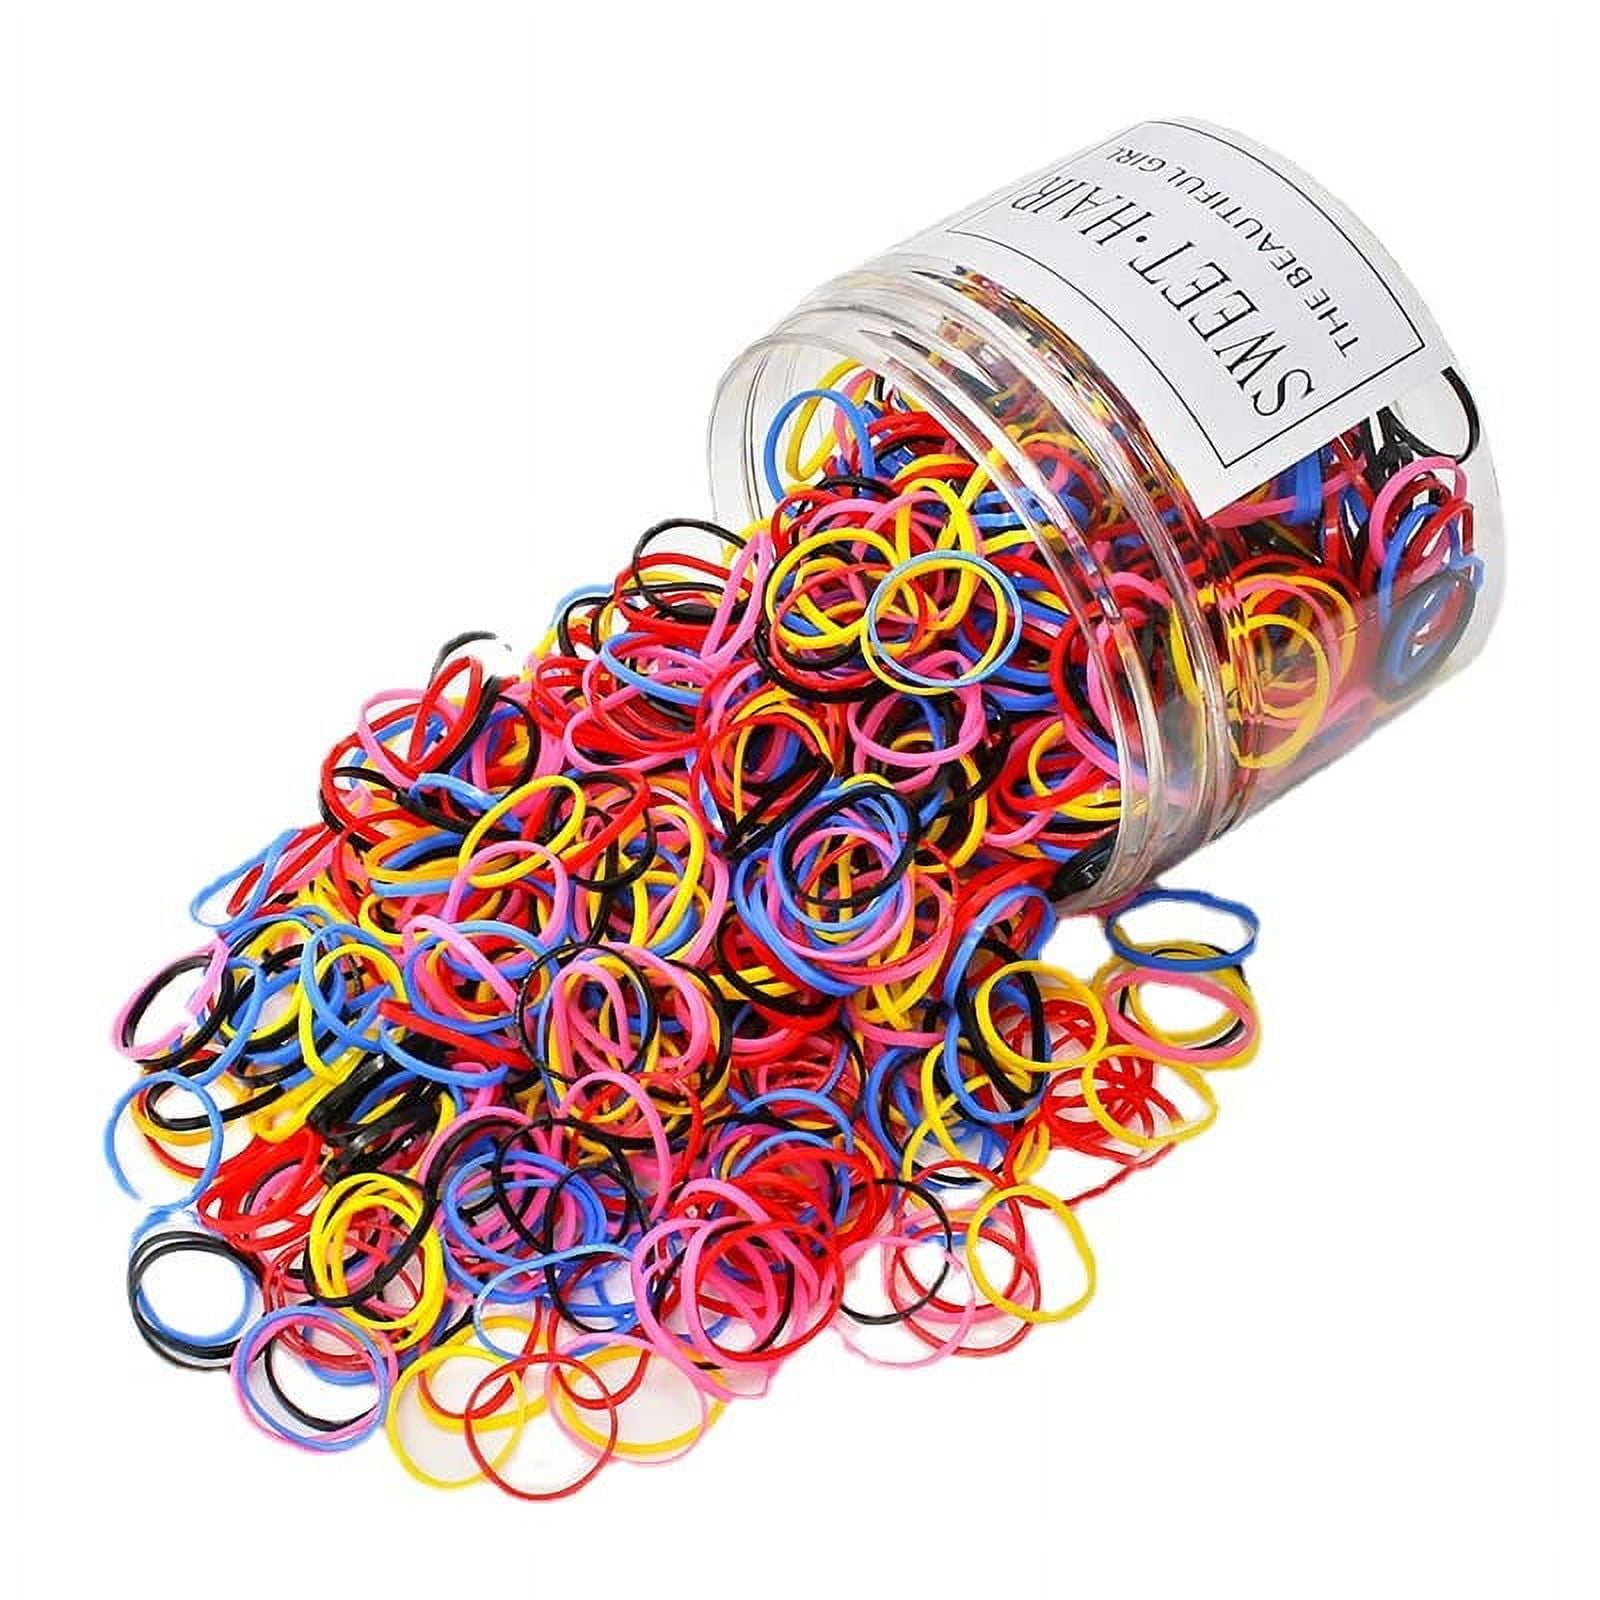 3000 Pcs Rubber Bands 0.6 lb Hair Band Soft Elastic Hair Accessories Braids  Mini Hair Ties Stretchy Made in Vietnam Hair Ties No Damage Rubber Bands